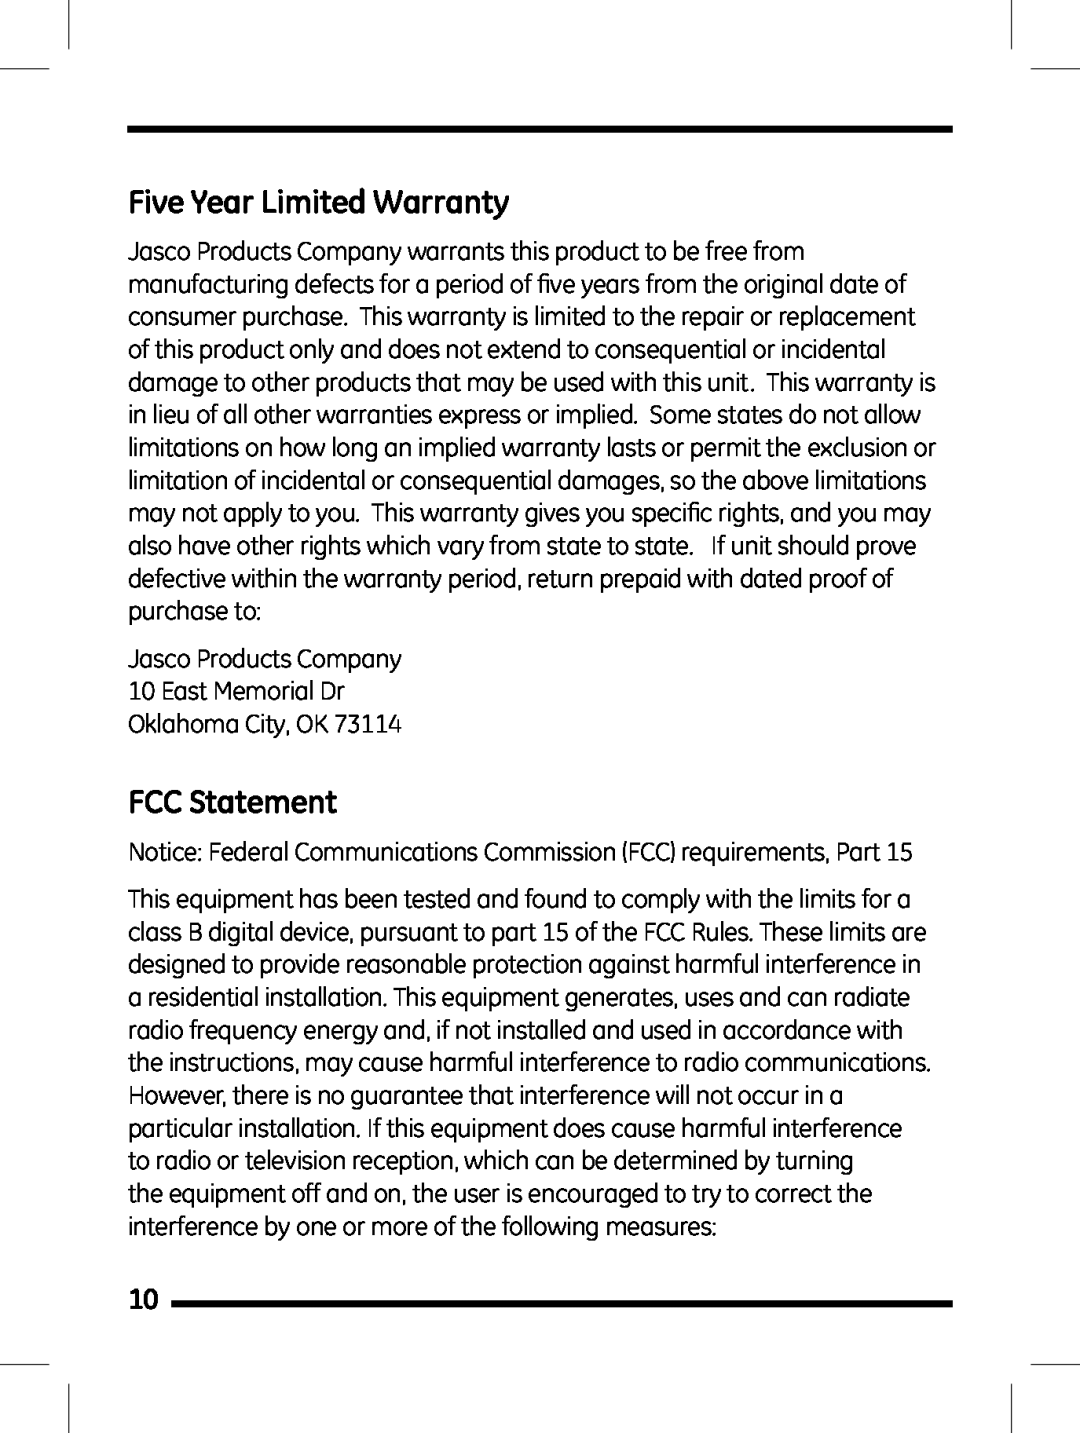 GE 98504 Five Year Limited Warranty, FCC Statement, Jasco Products Company 10 East Memorial Dr Oklahoma City, OK 